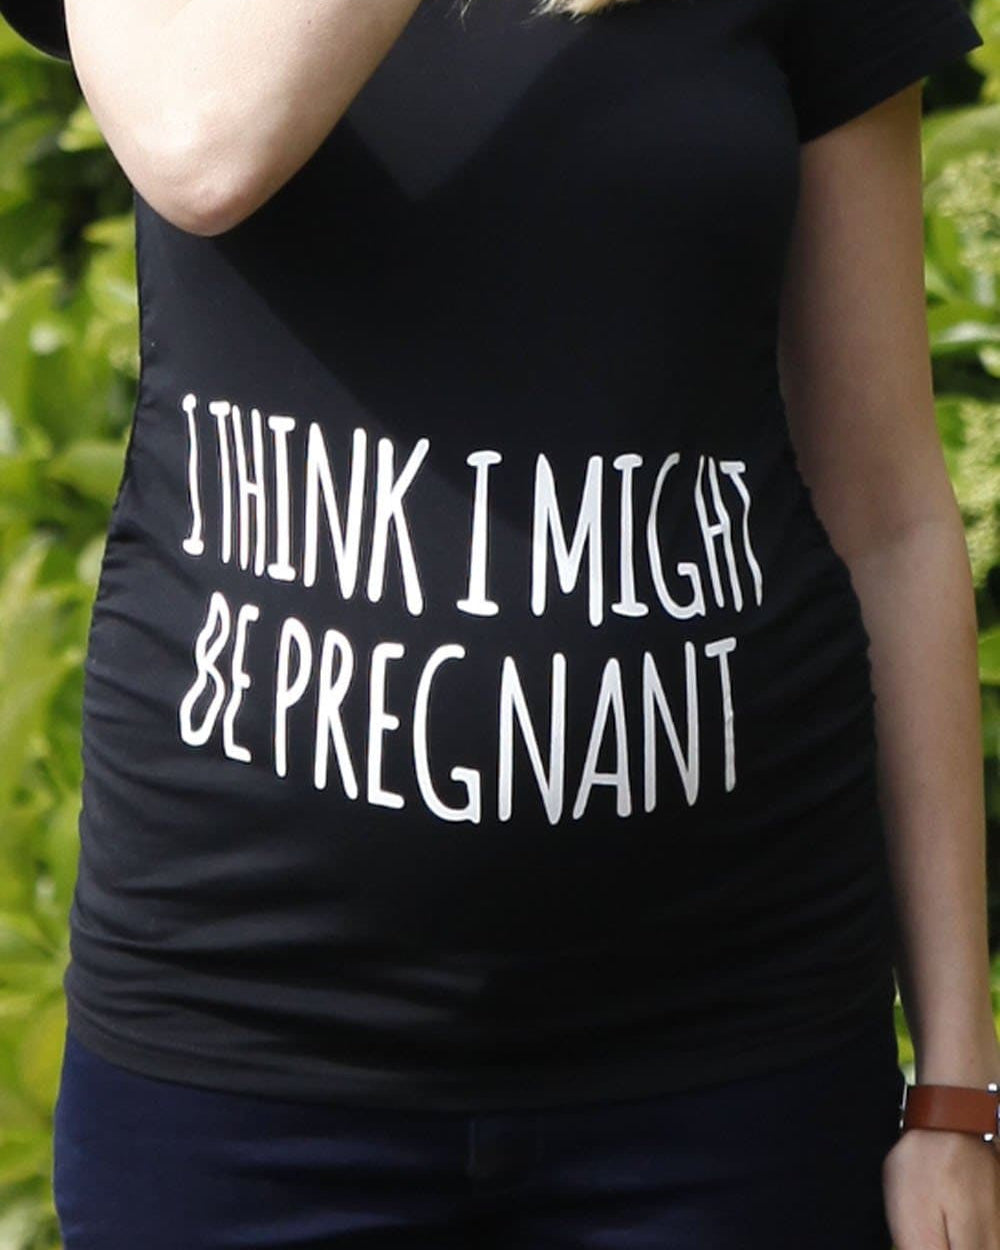 Basic Maternity Slogan Fitted Tee - I Think I might Be Pregnant - Angel Maternity - Maternity clothes - shop online (9984359814)